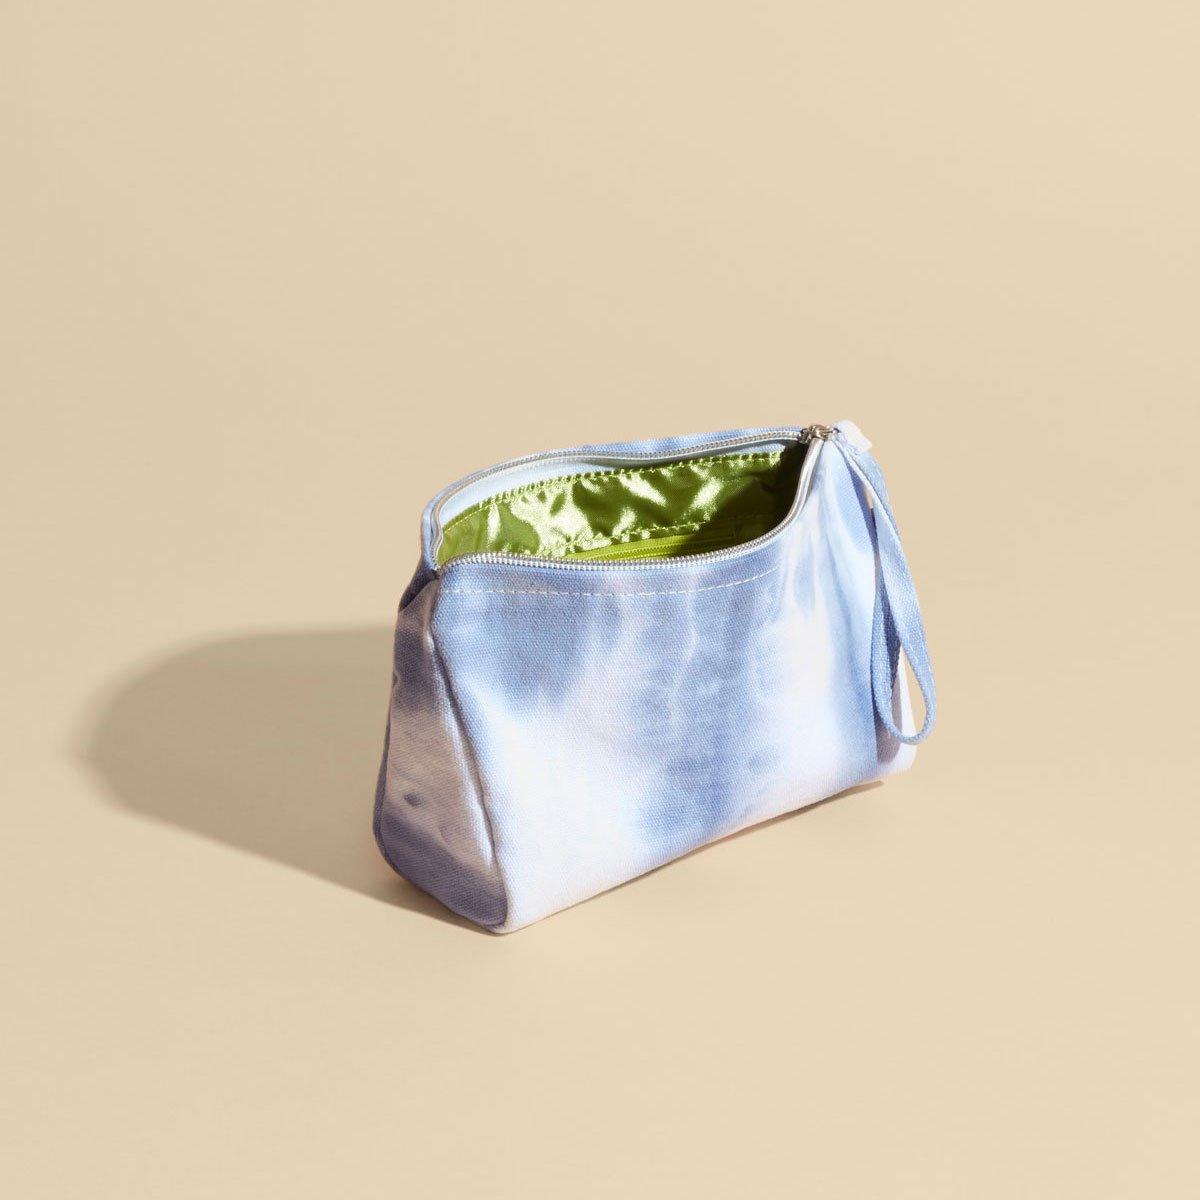 Stash Pouch by Dame Products - shop enby